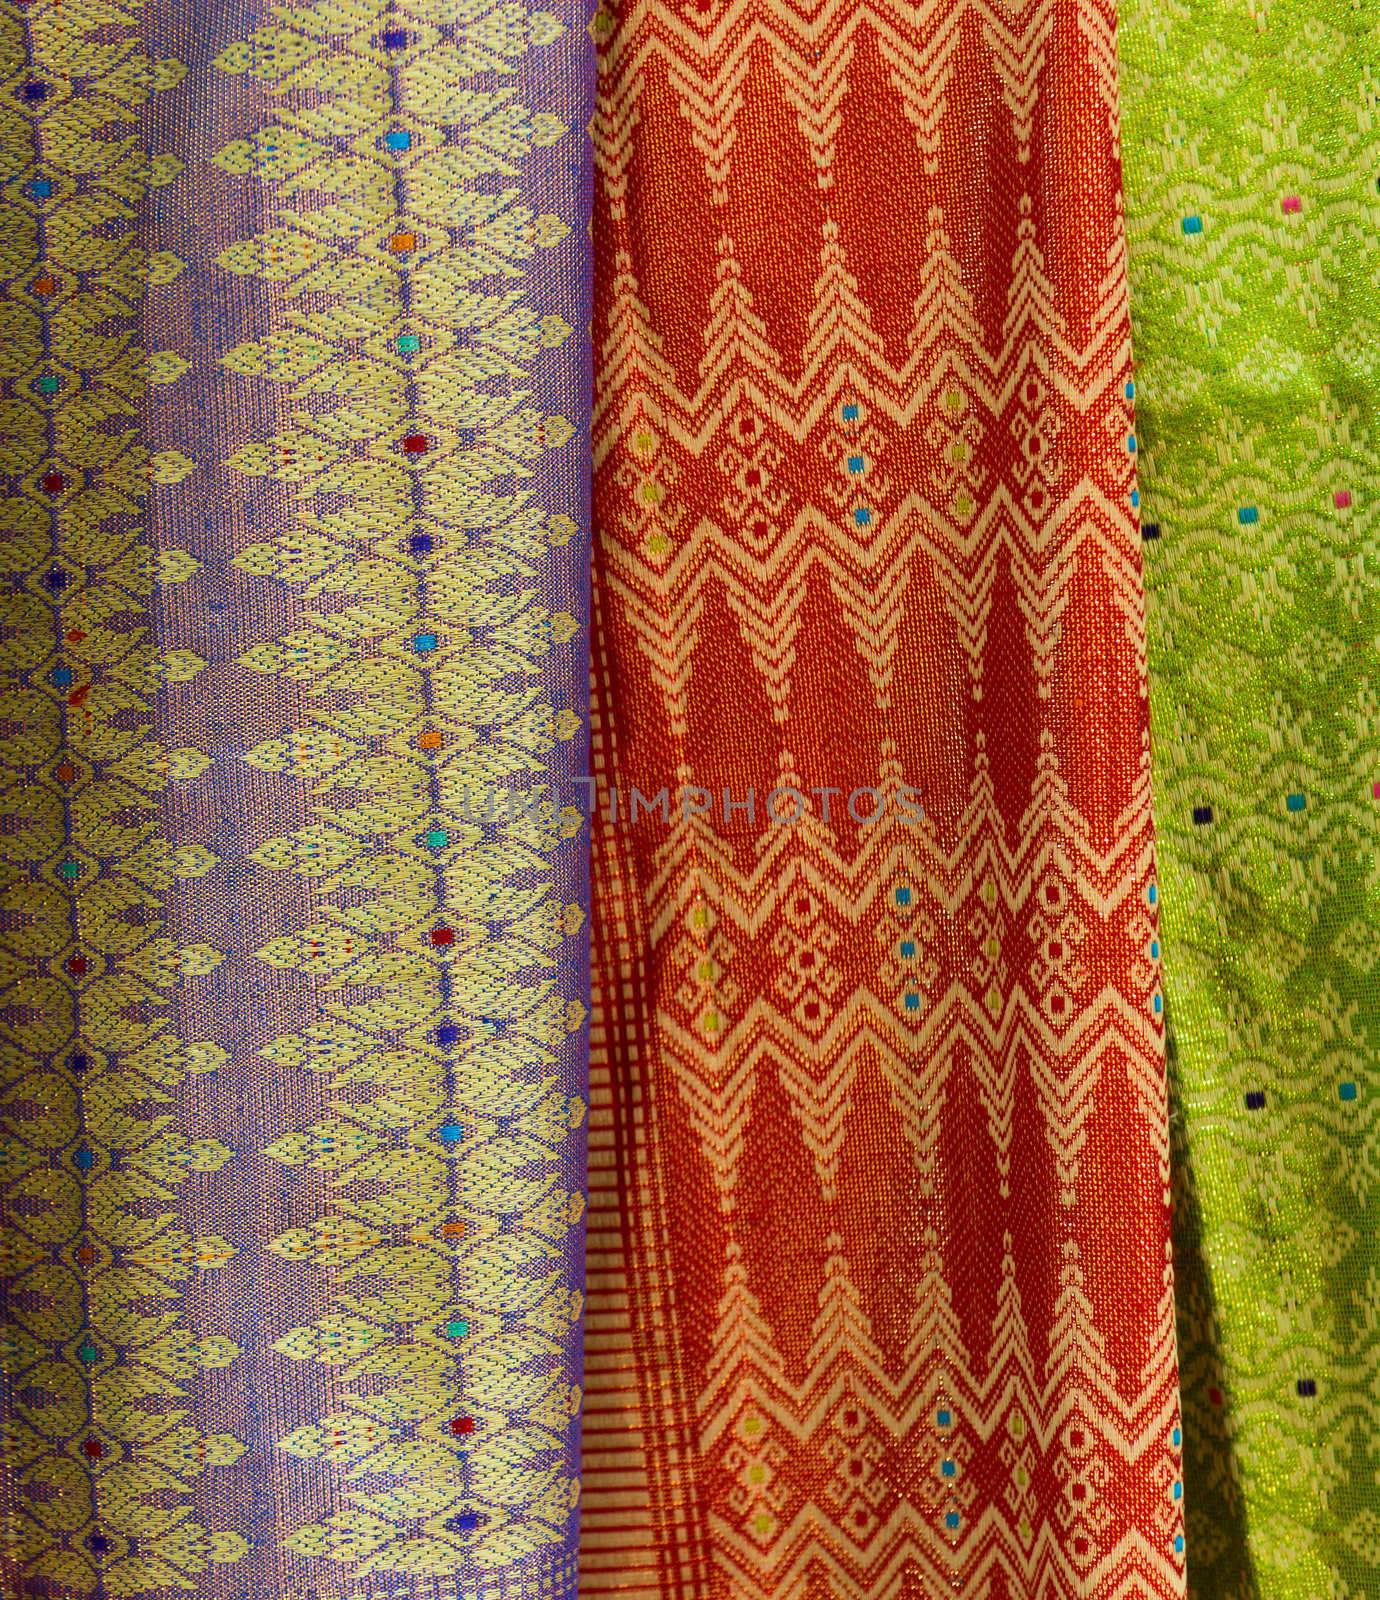 Assortment of colorful fabrics for sale in Bali, Indonesia